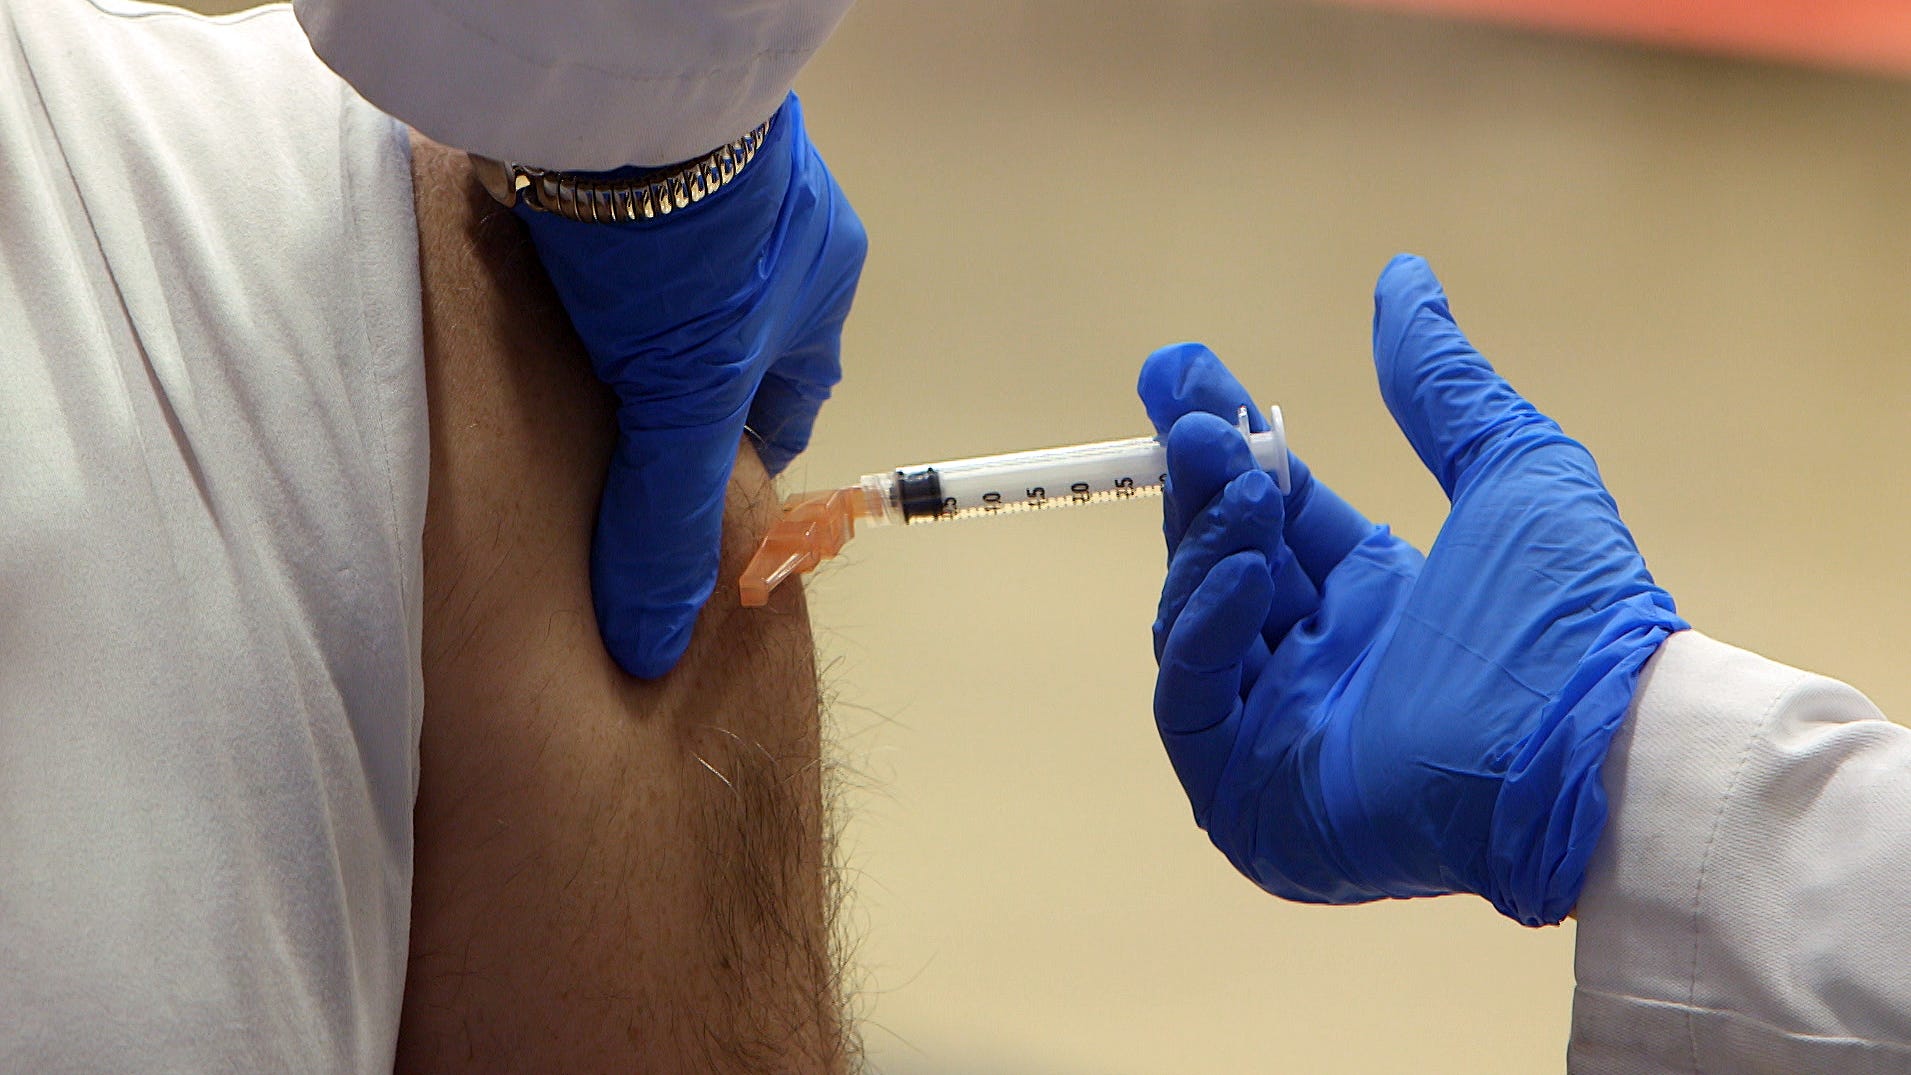 Ocean County opens COVID19 vaccine clinic for health care